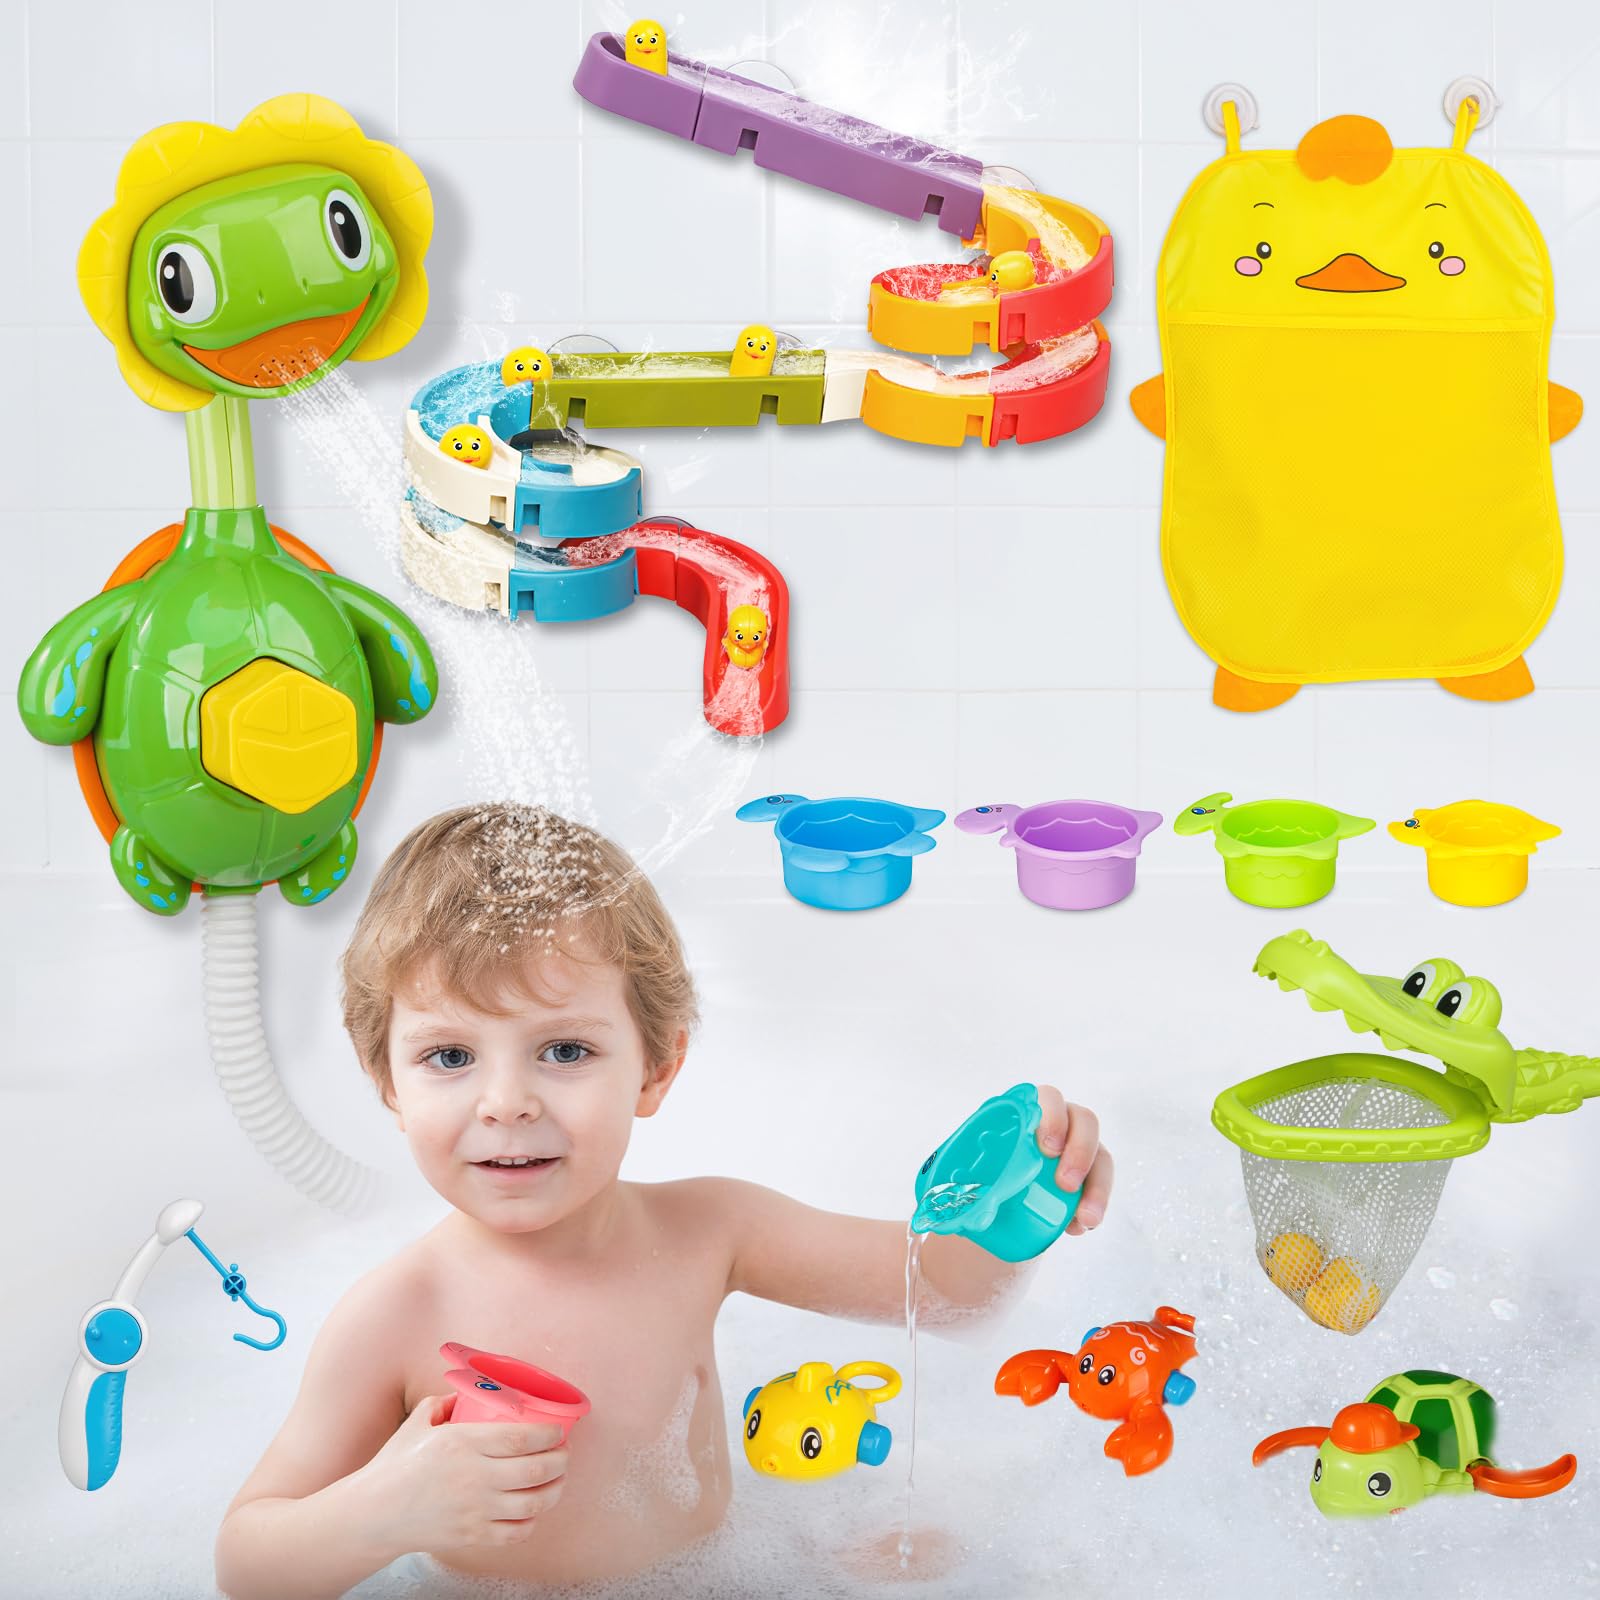 Bath Toys for Toddler, Kids Bathtub Time, Shower Spary Yellow Duck Slide Wall Track, Dinosaur Water Stacking Cups, Wind Up Turtle Fishing Game & Storage Bag Fun Birthday Gift for Baby Boy & Girl